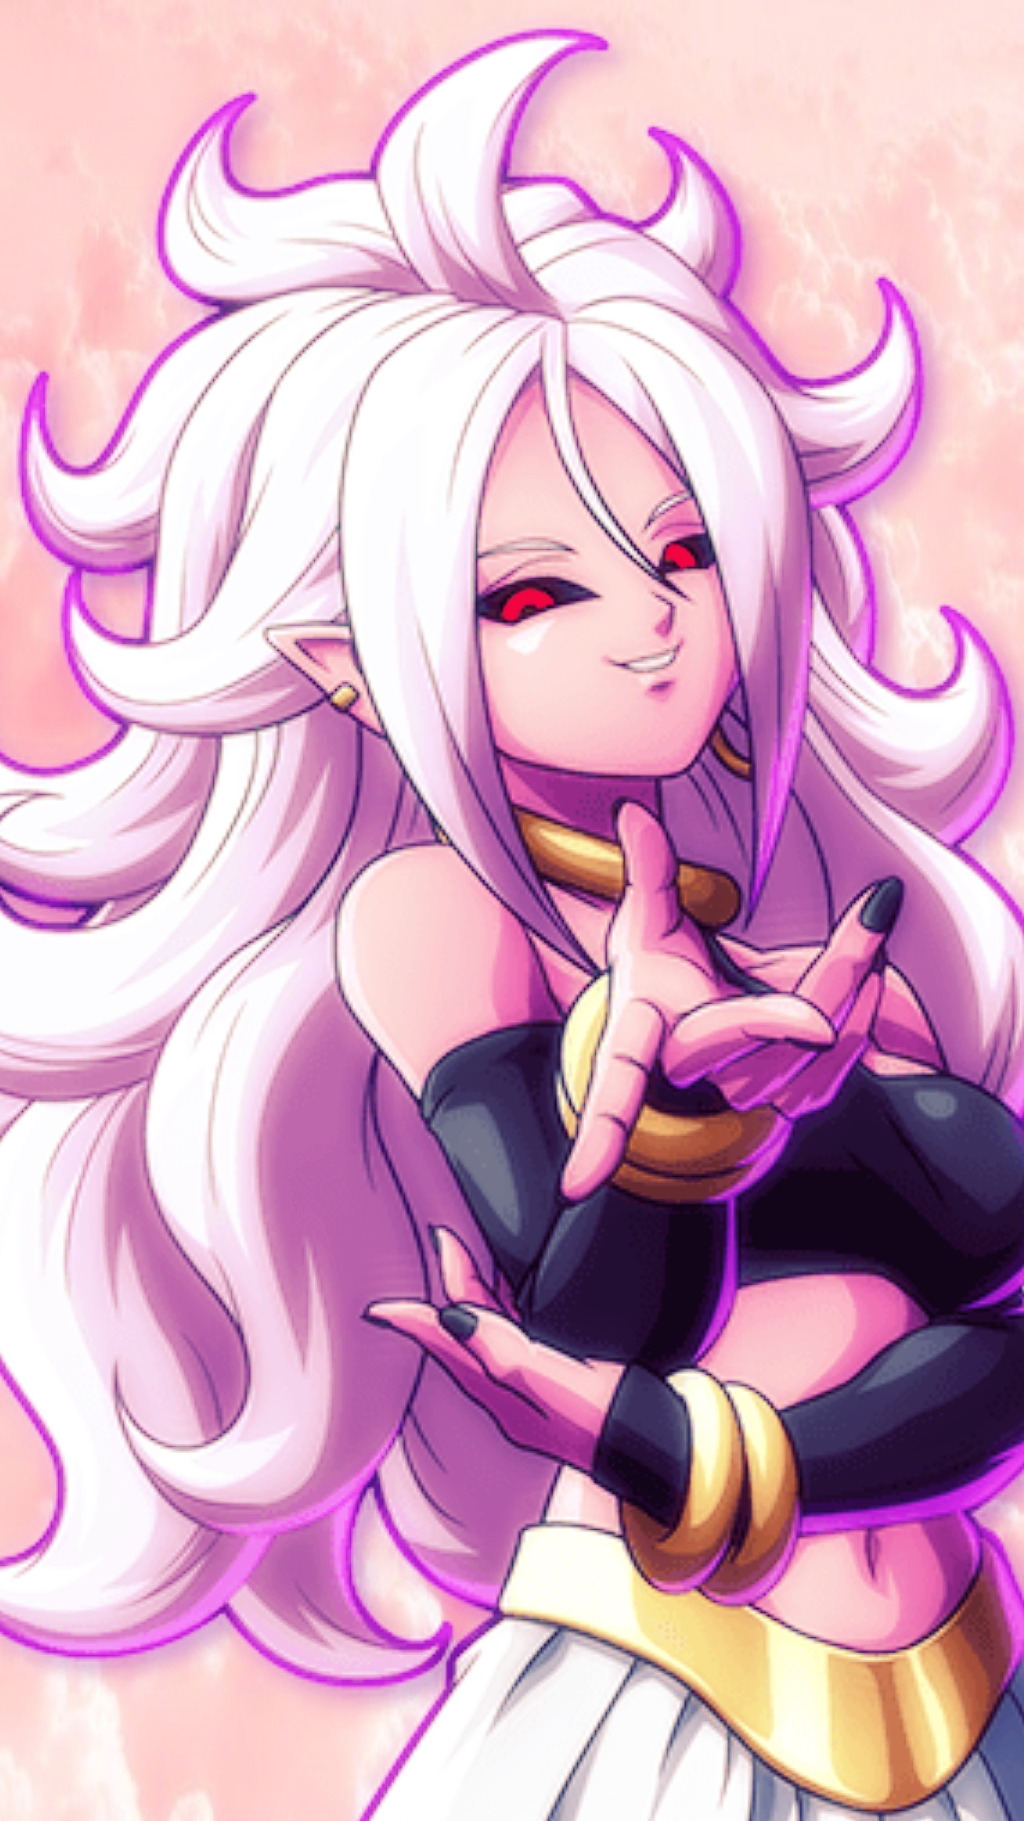 Dbz Android 21 Wallpaper